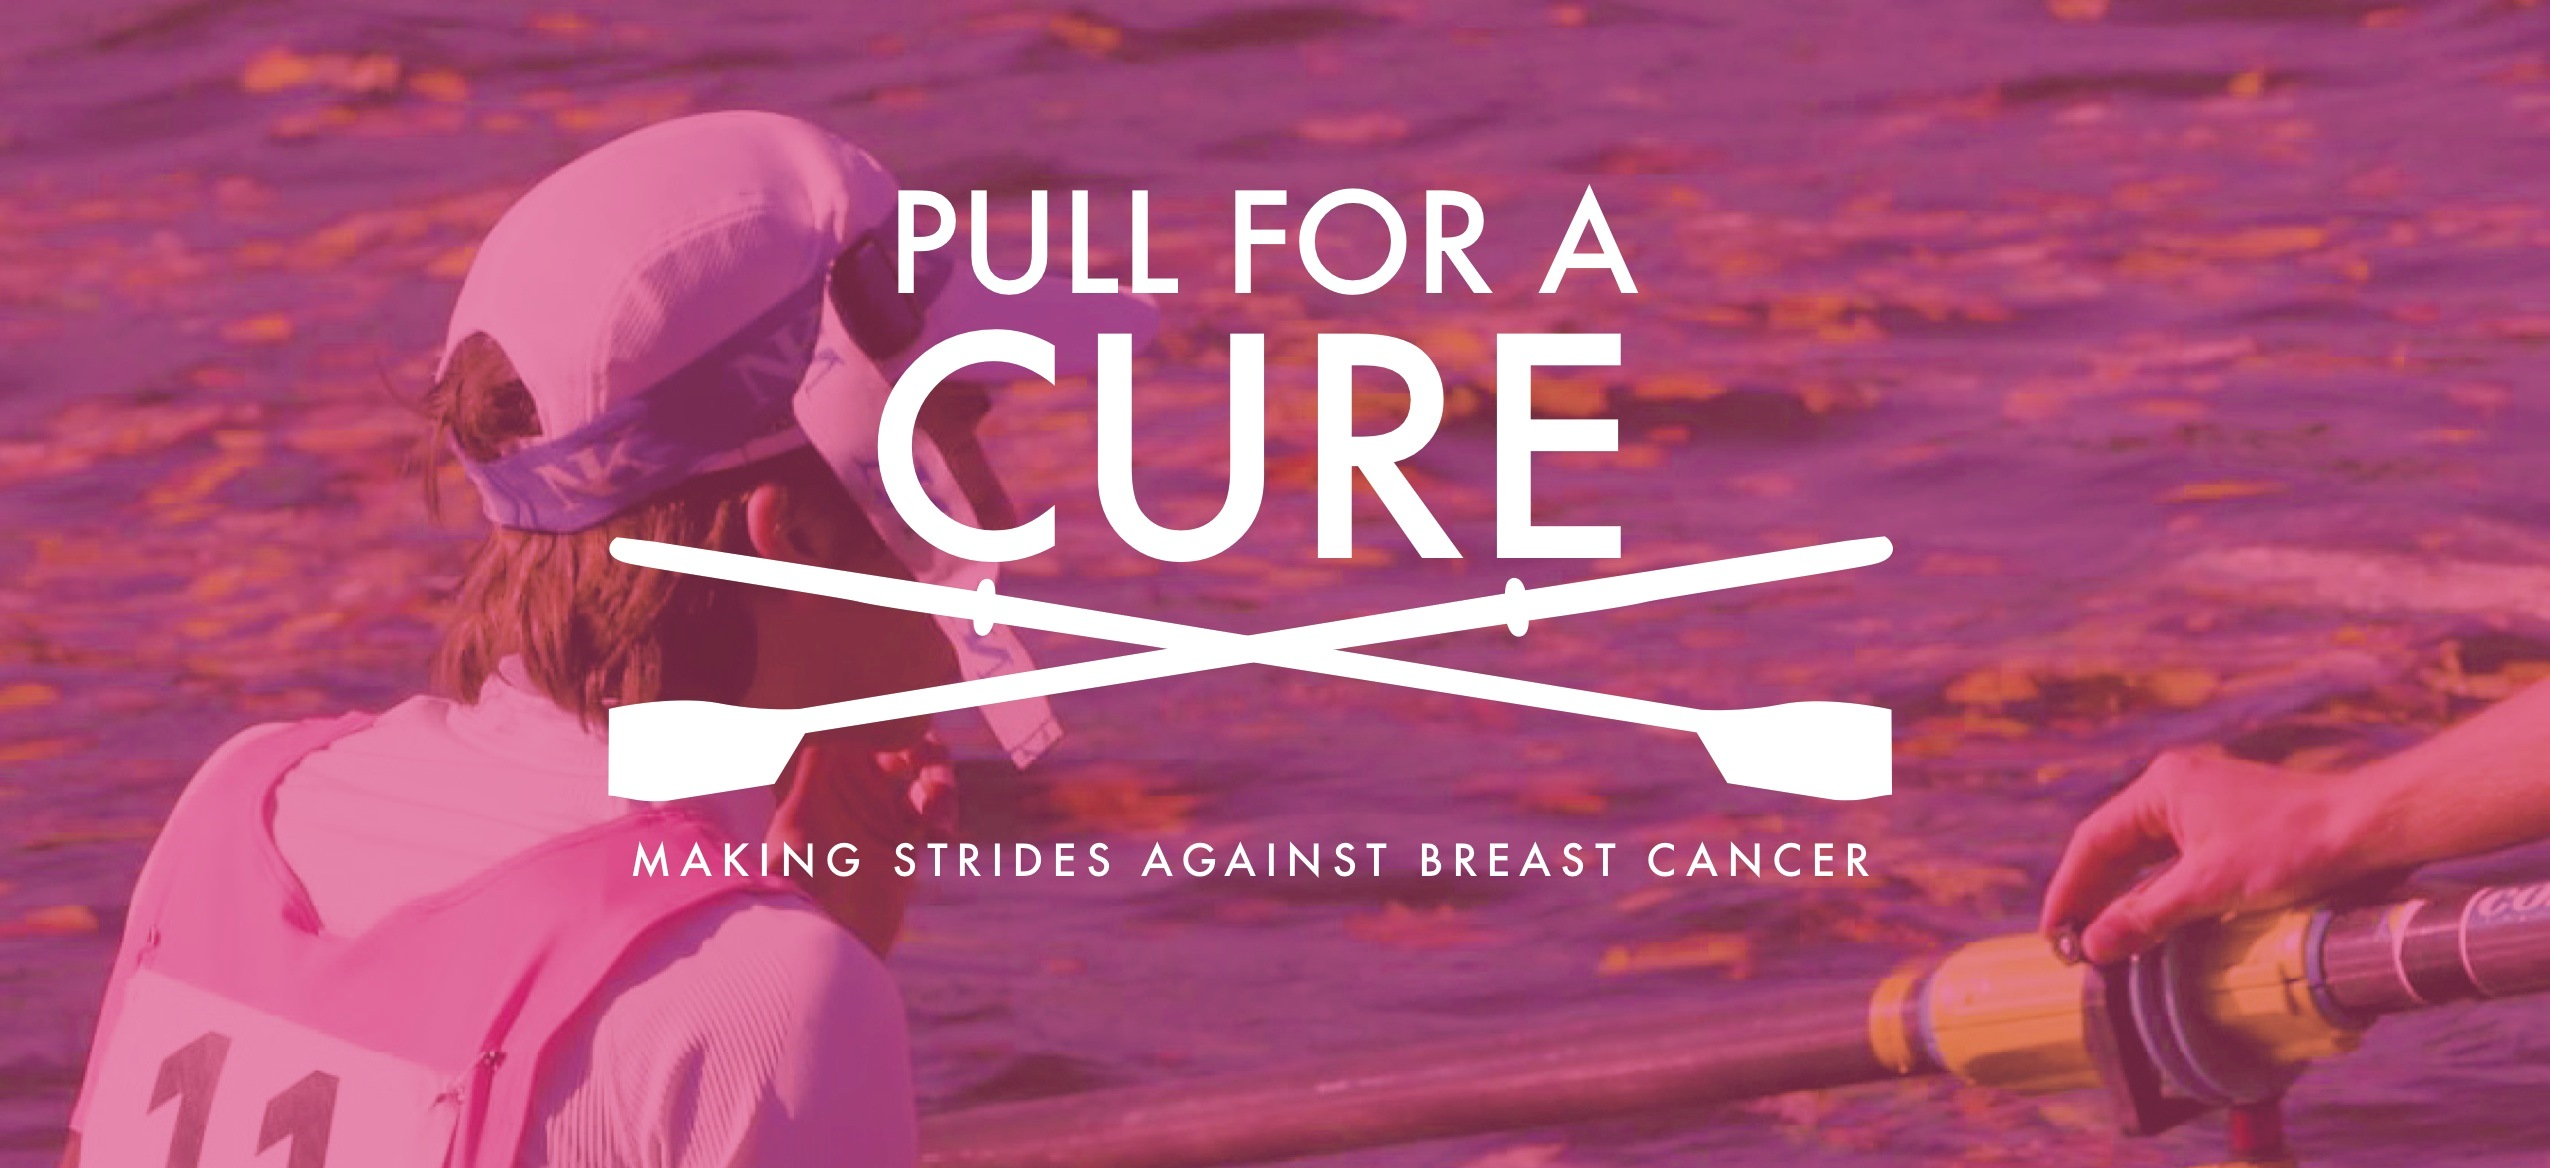 MSABC CY14 NE Pull for a cure header image cropped